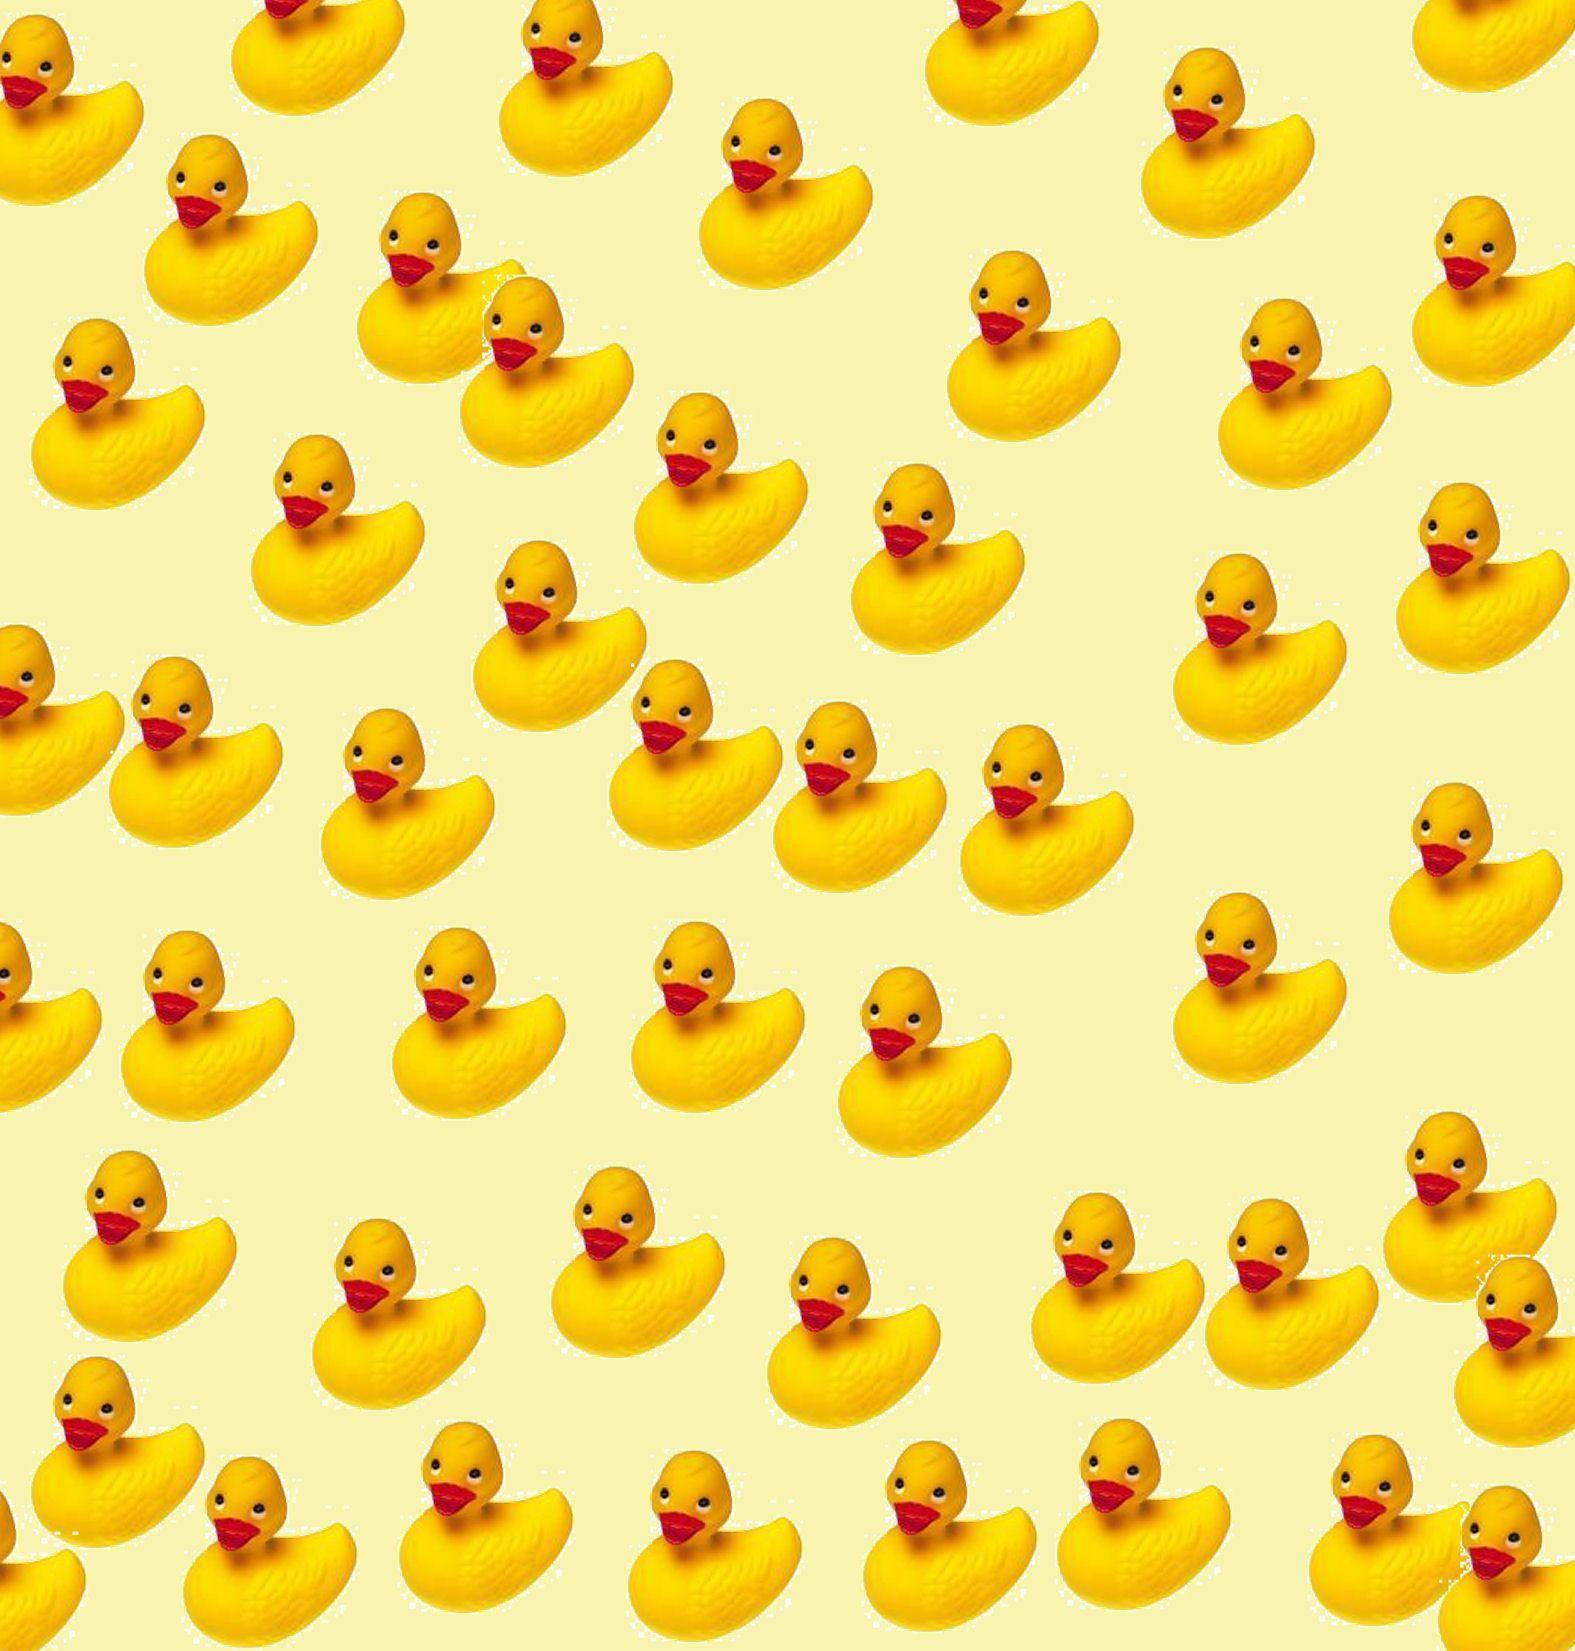 Gallery For Gt Rubber Duck Background